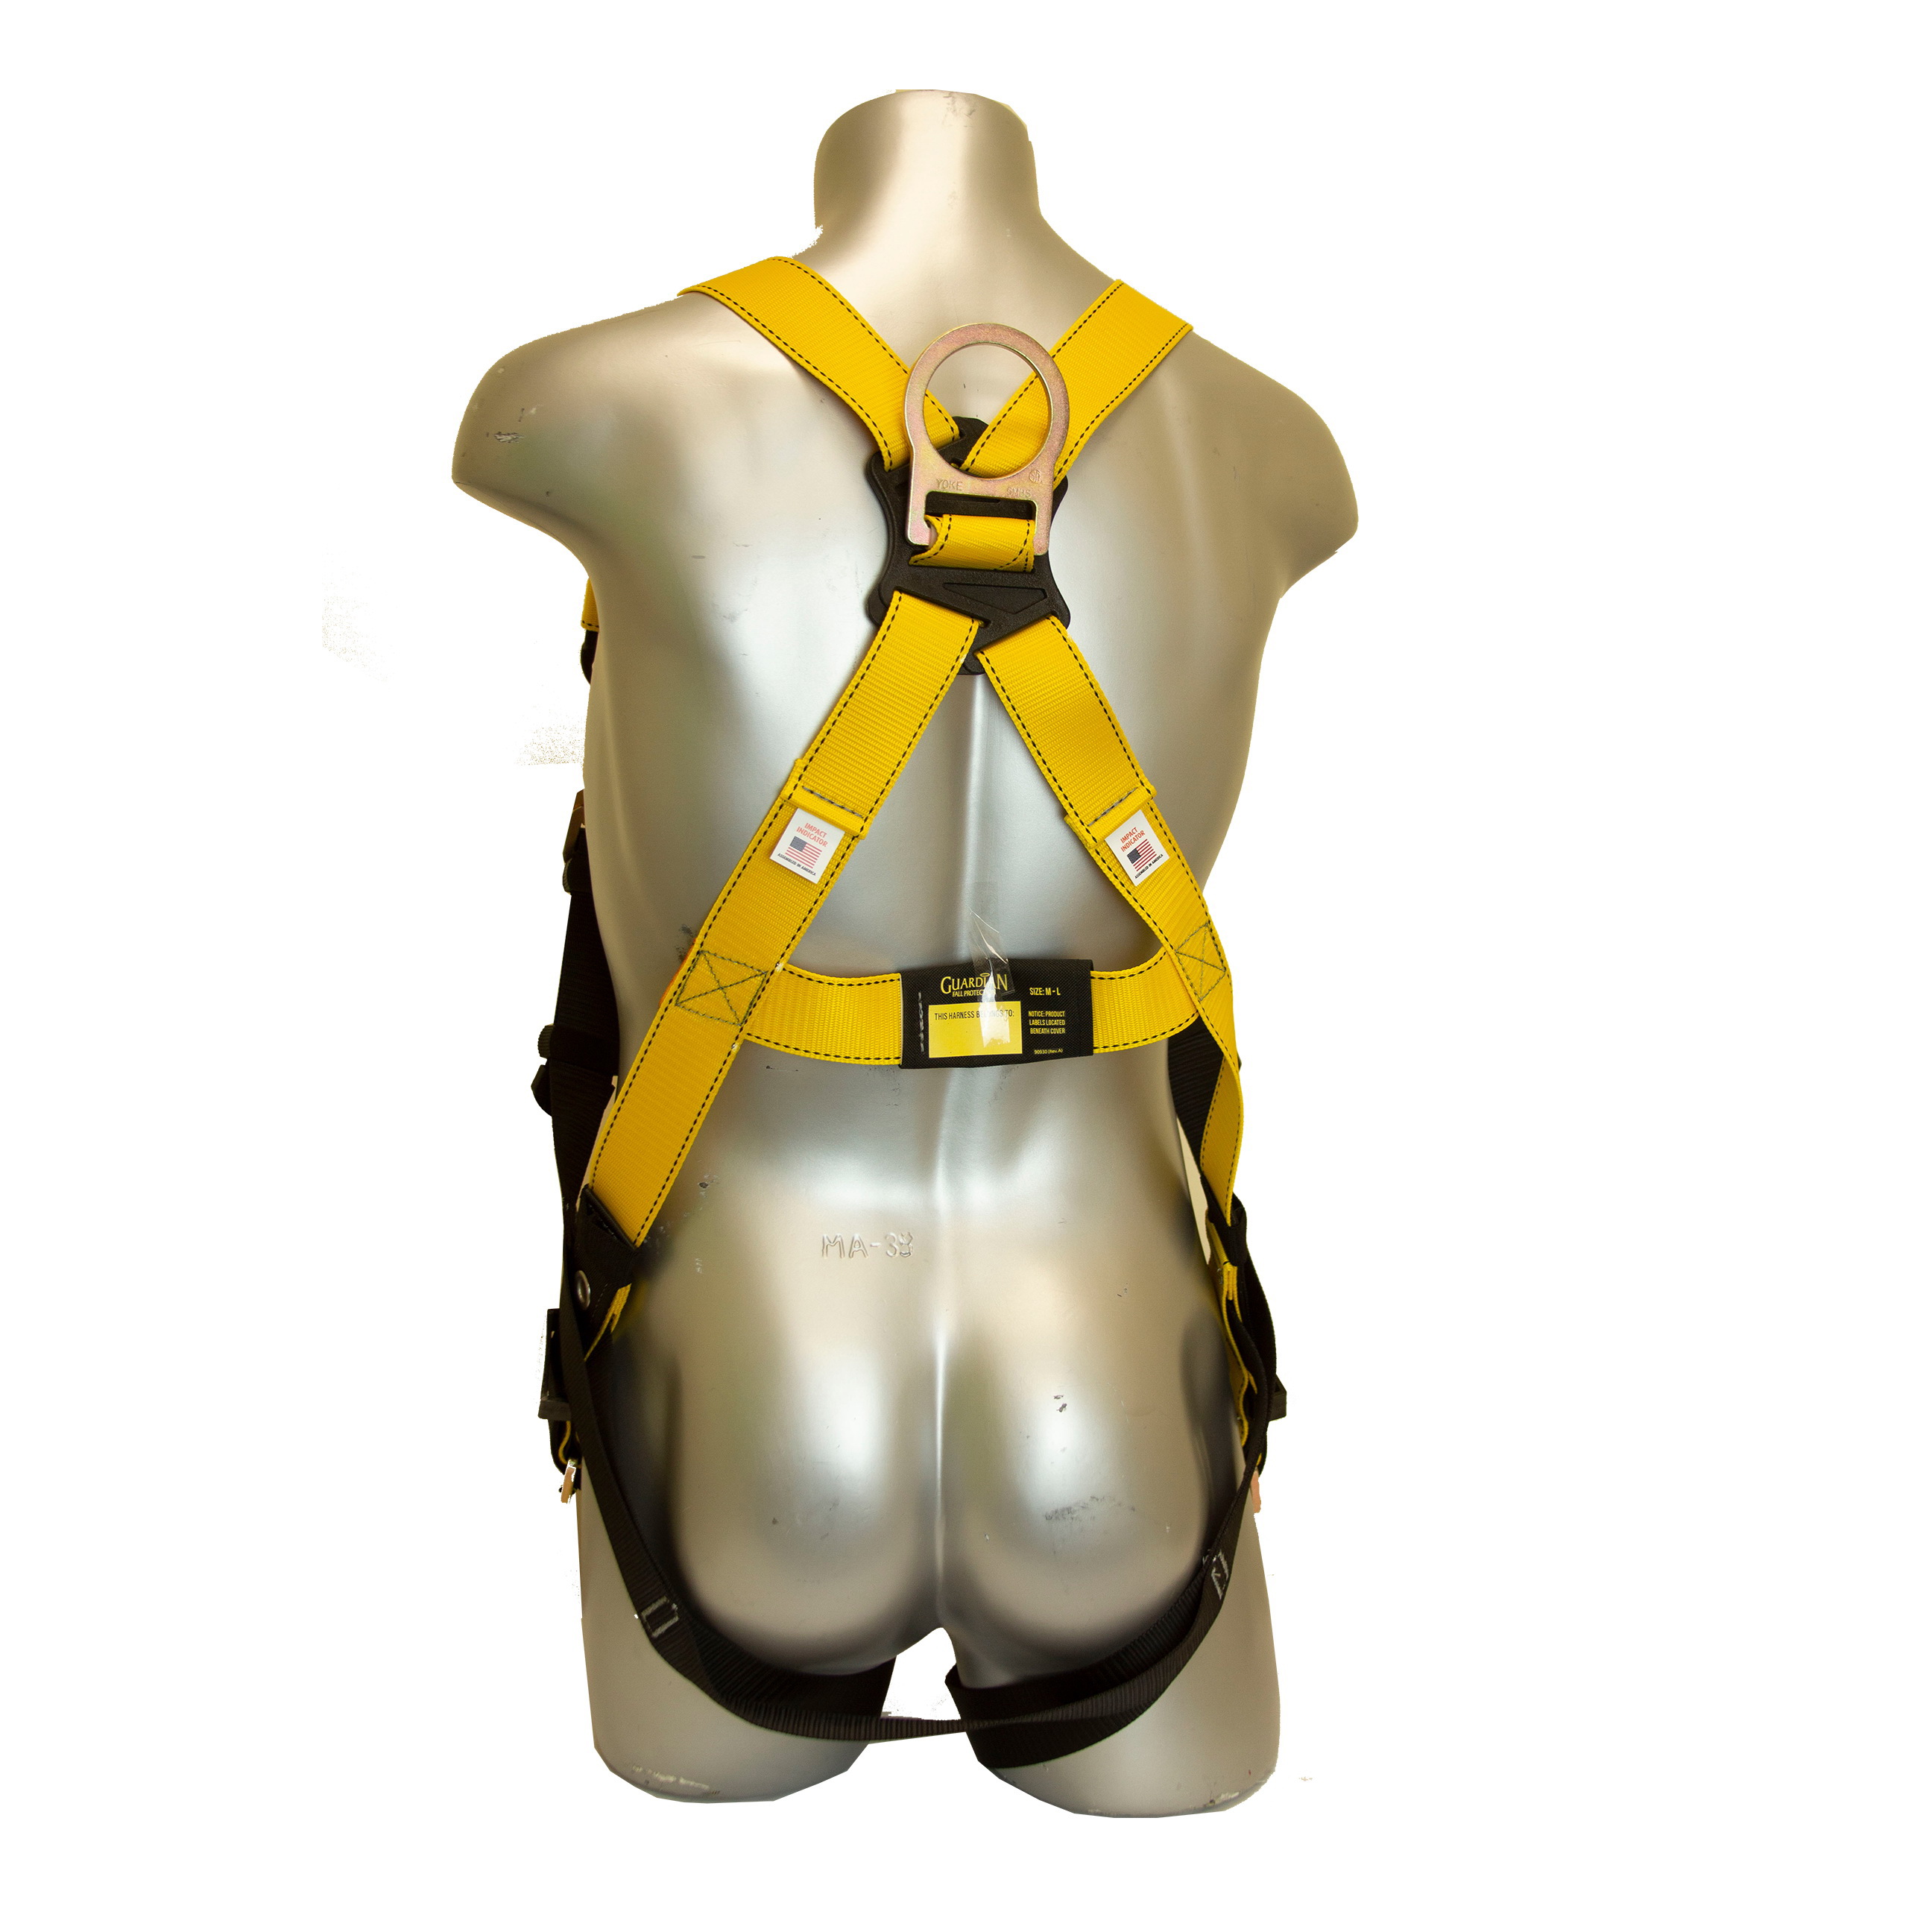 Guardian Fall Protection 37005B Full Body Harness, M/L, 130 to 420 lb, Polyester Webbing, Black/Yellow - 2